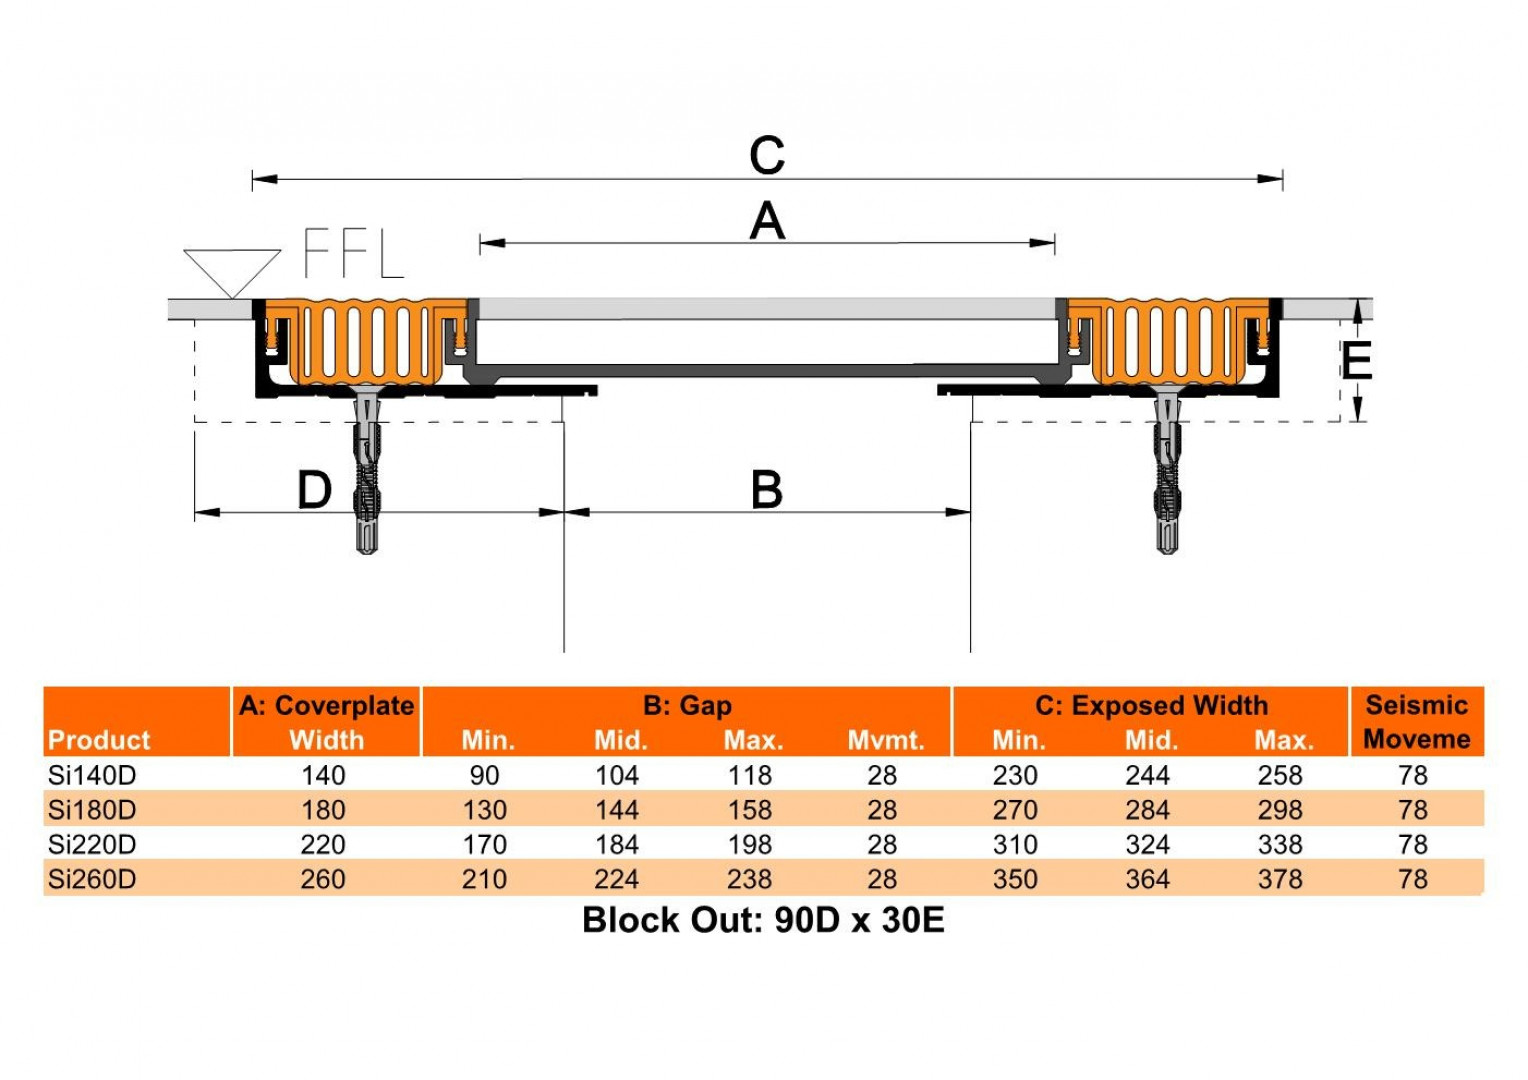 Si DX (Concealed Cover Dual Gasket Seismic Floor Expansion Joint) from Unison Joints